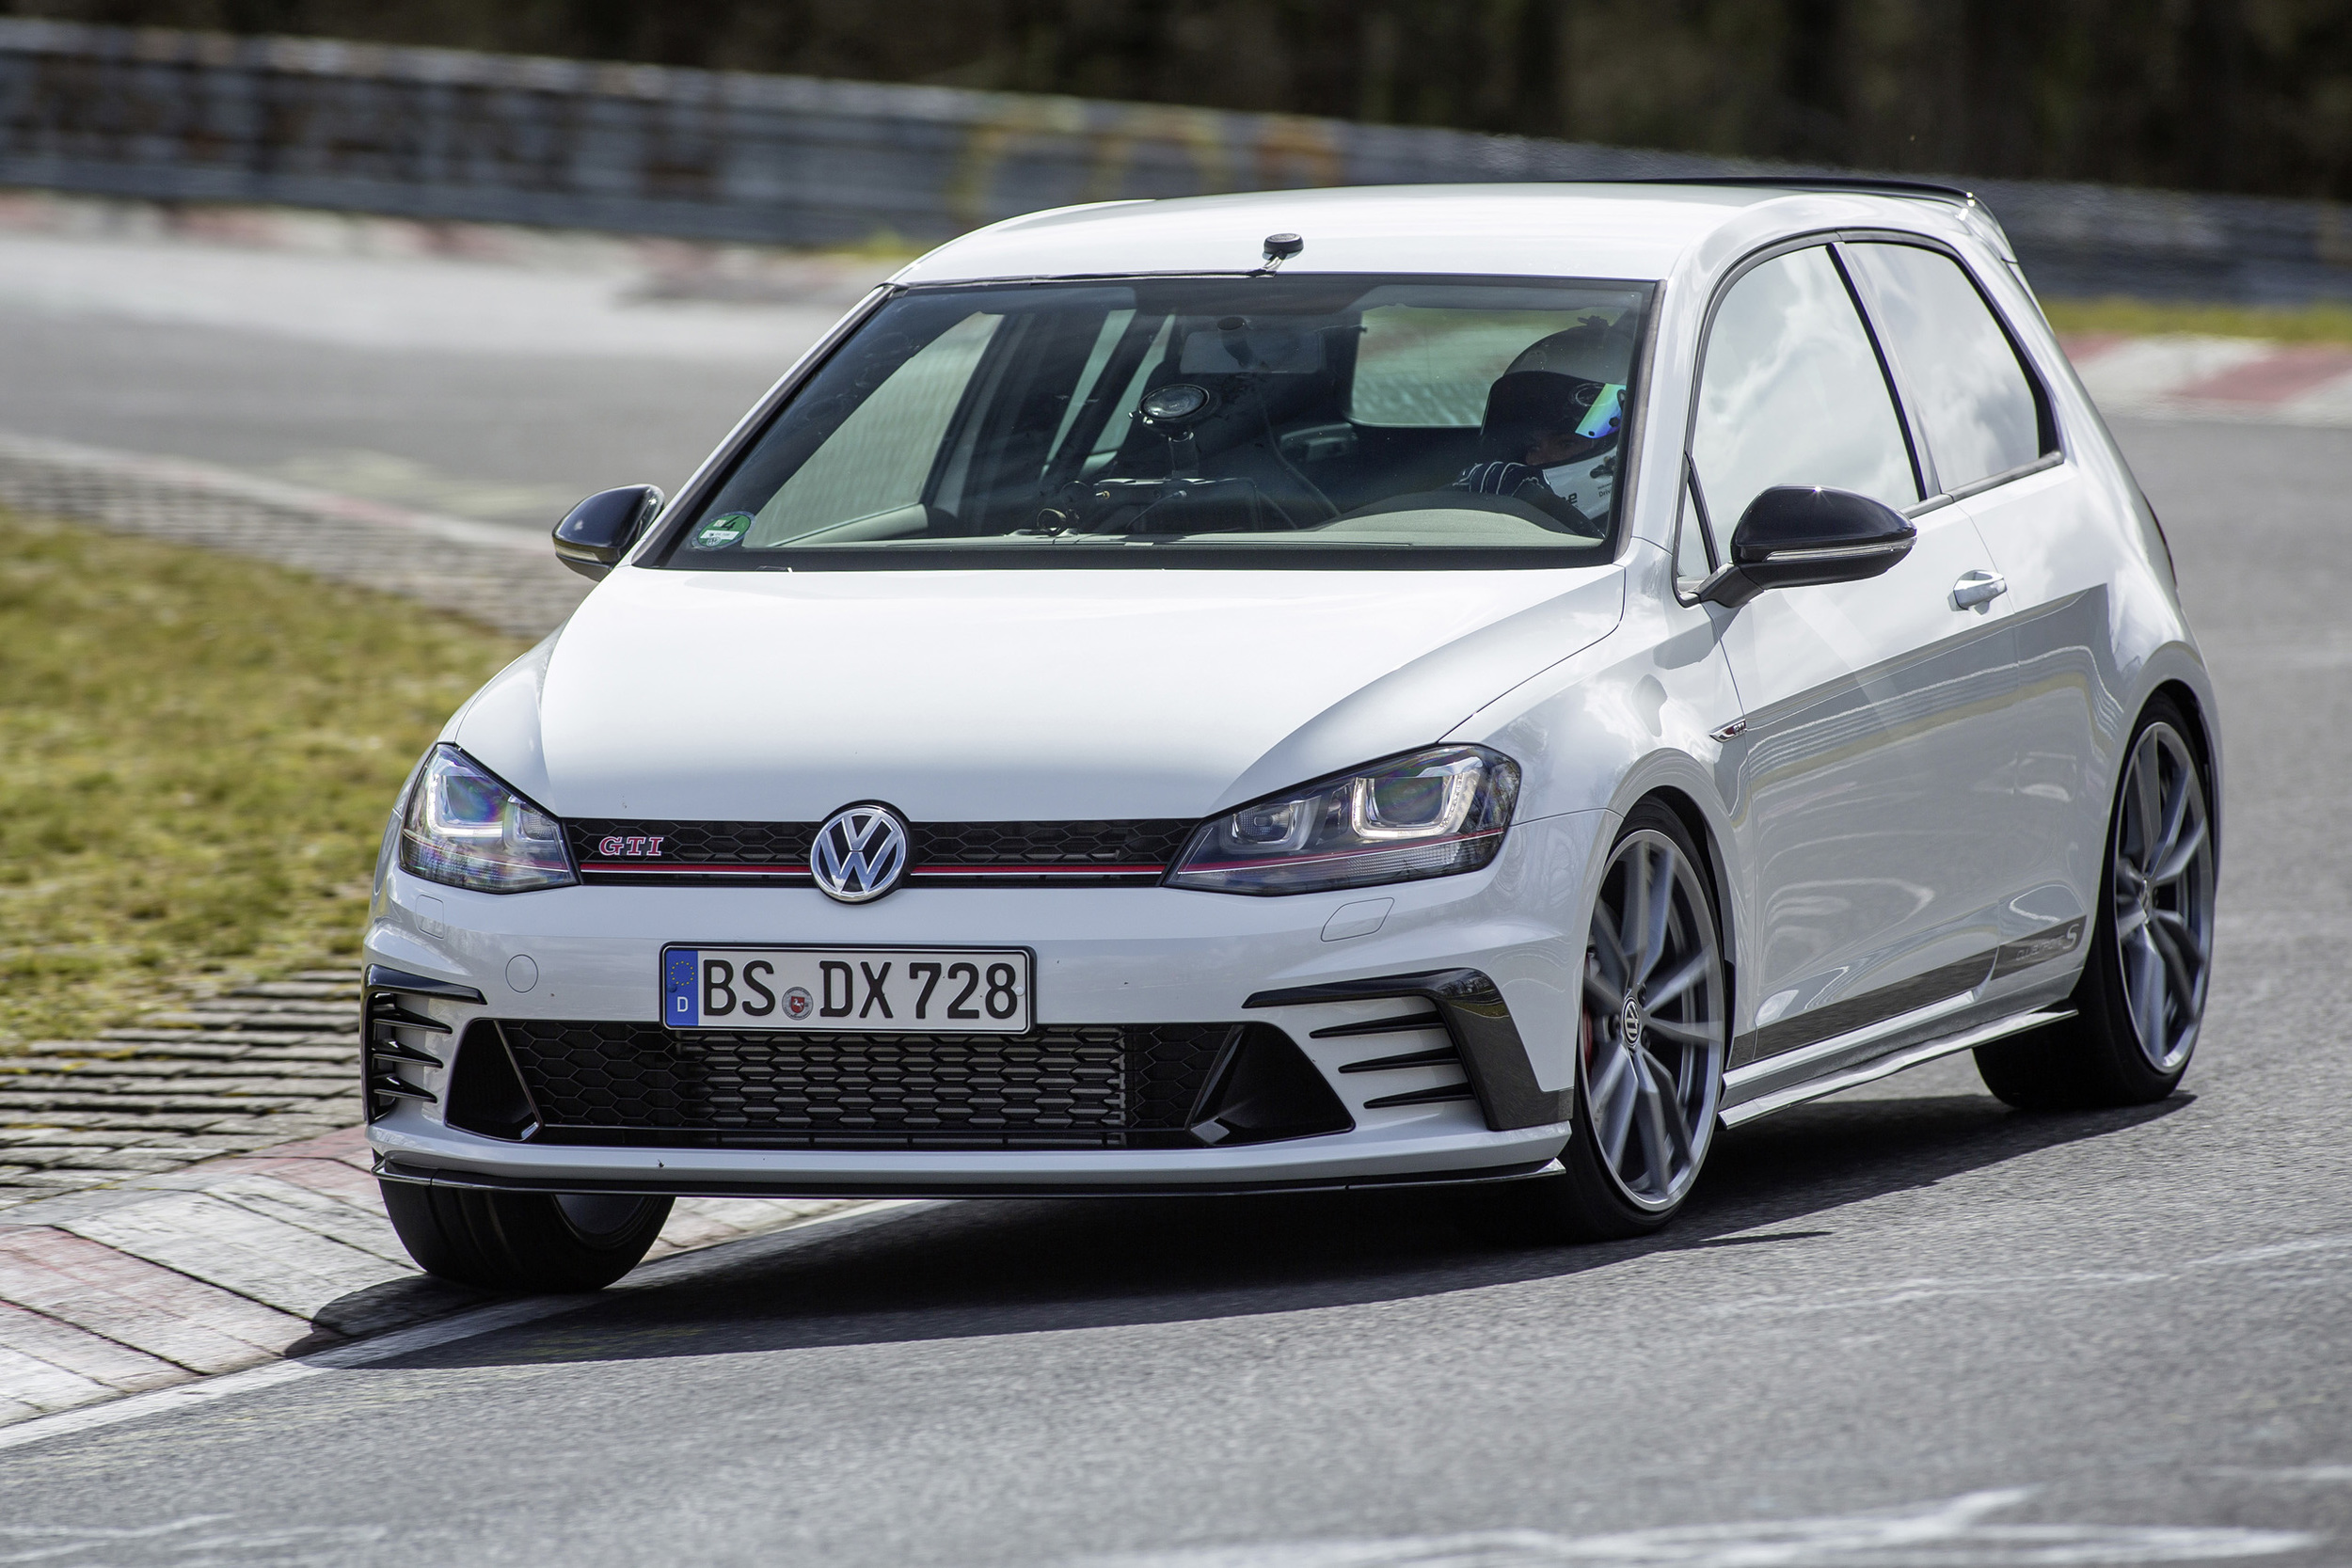 VW Golf GTI Clubsport S UK allocation already sold out — New Car Net